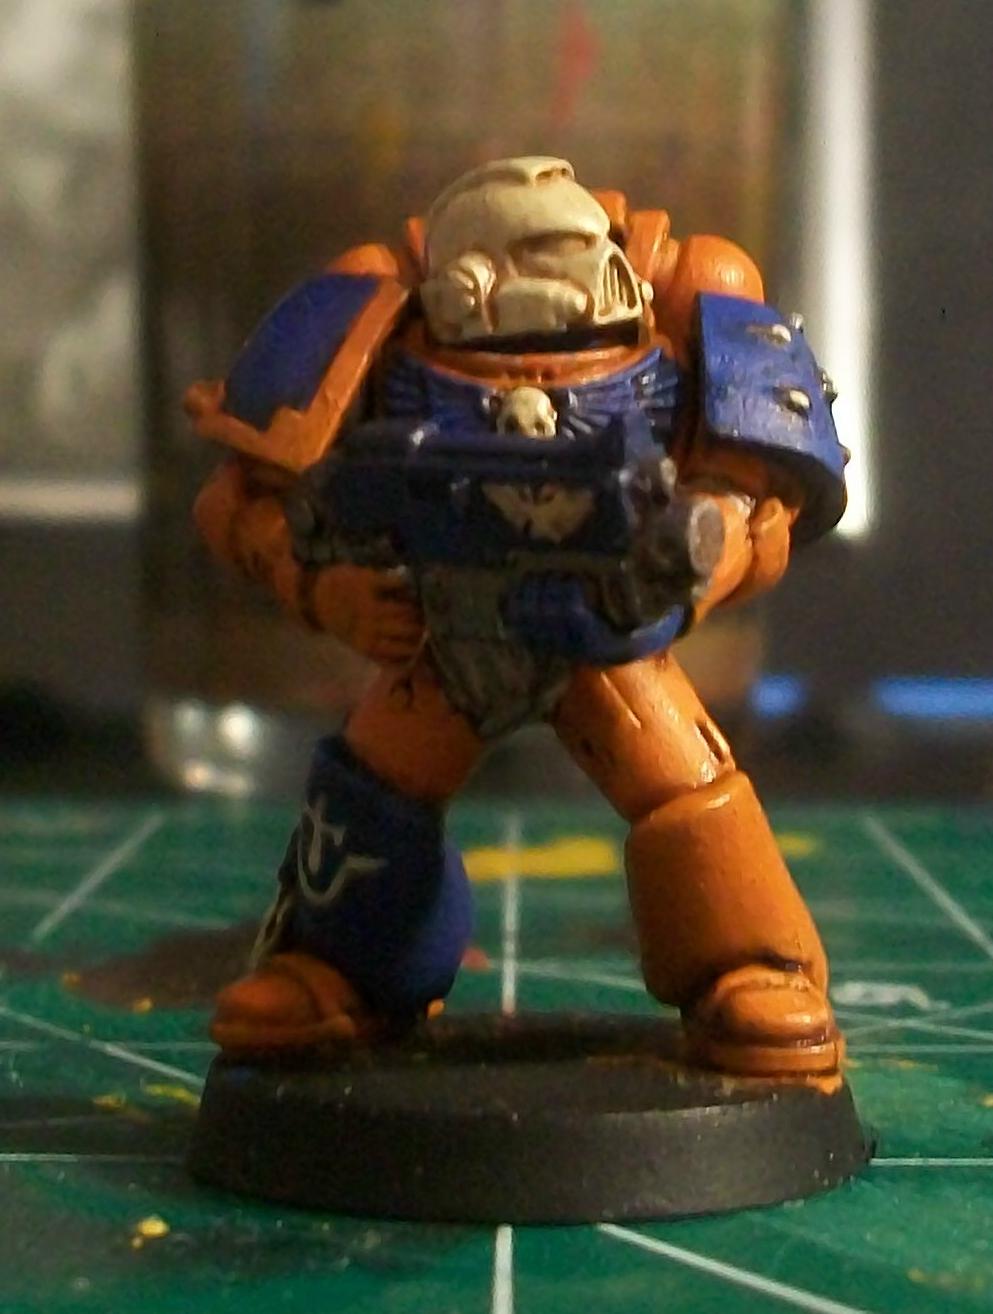 My custom Space Marine Chaper. I call them The Knights of Guilliman. A sucsessor of the Ultramarines